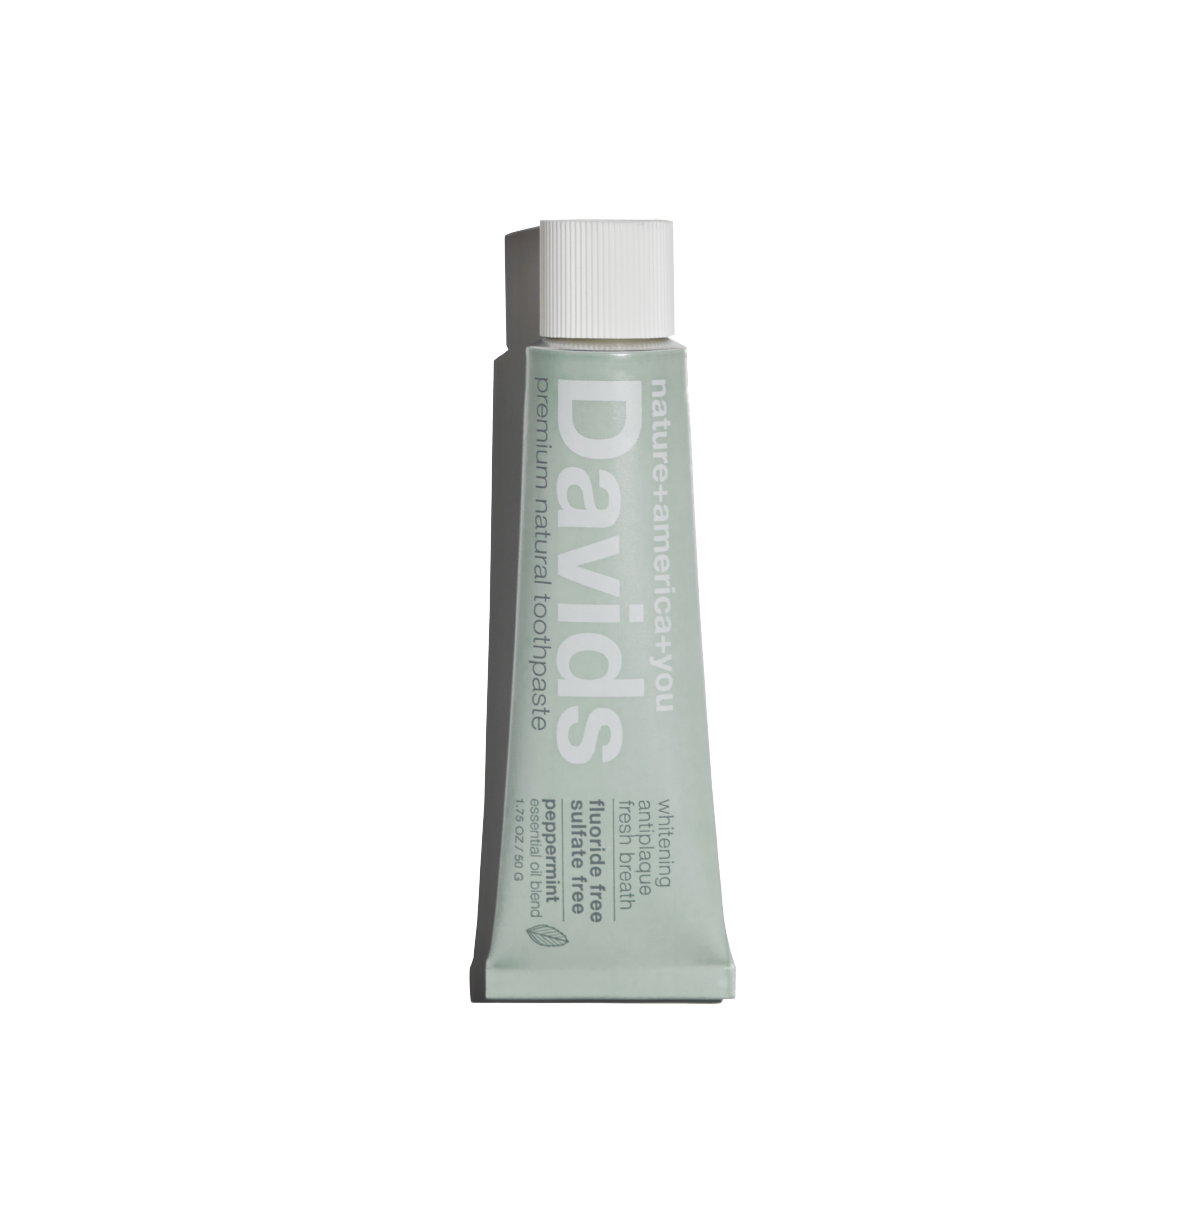 Davids Toothpaste | peppermint travel size